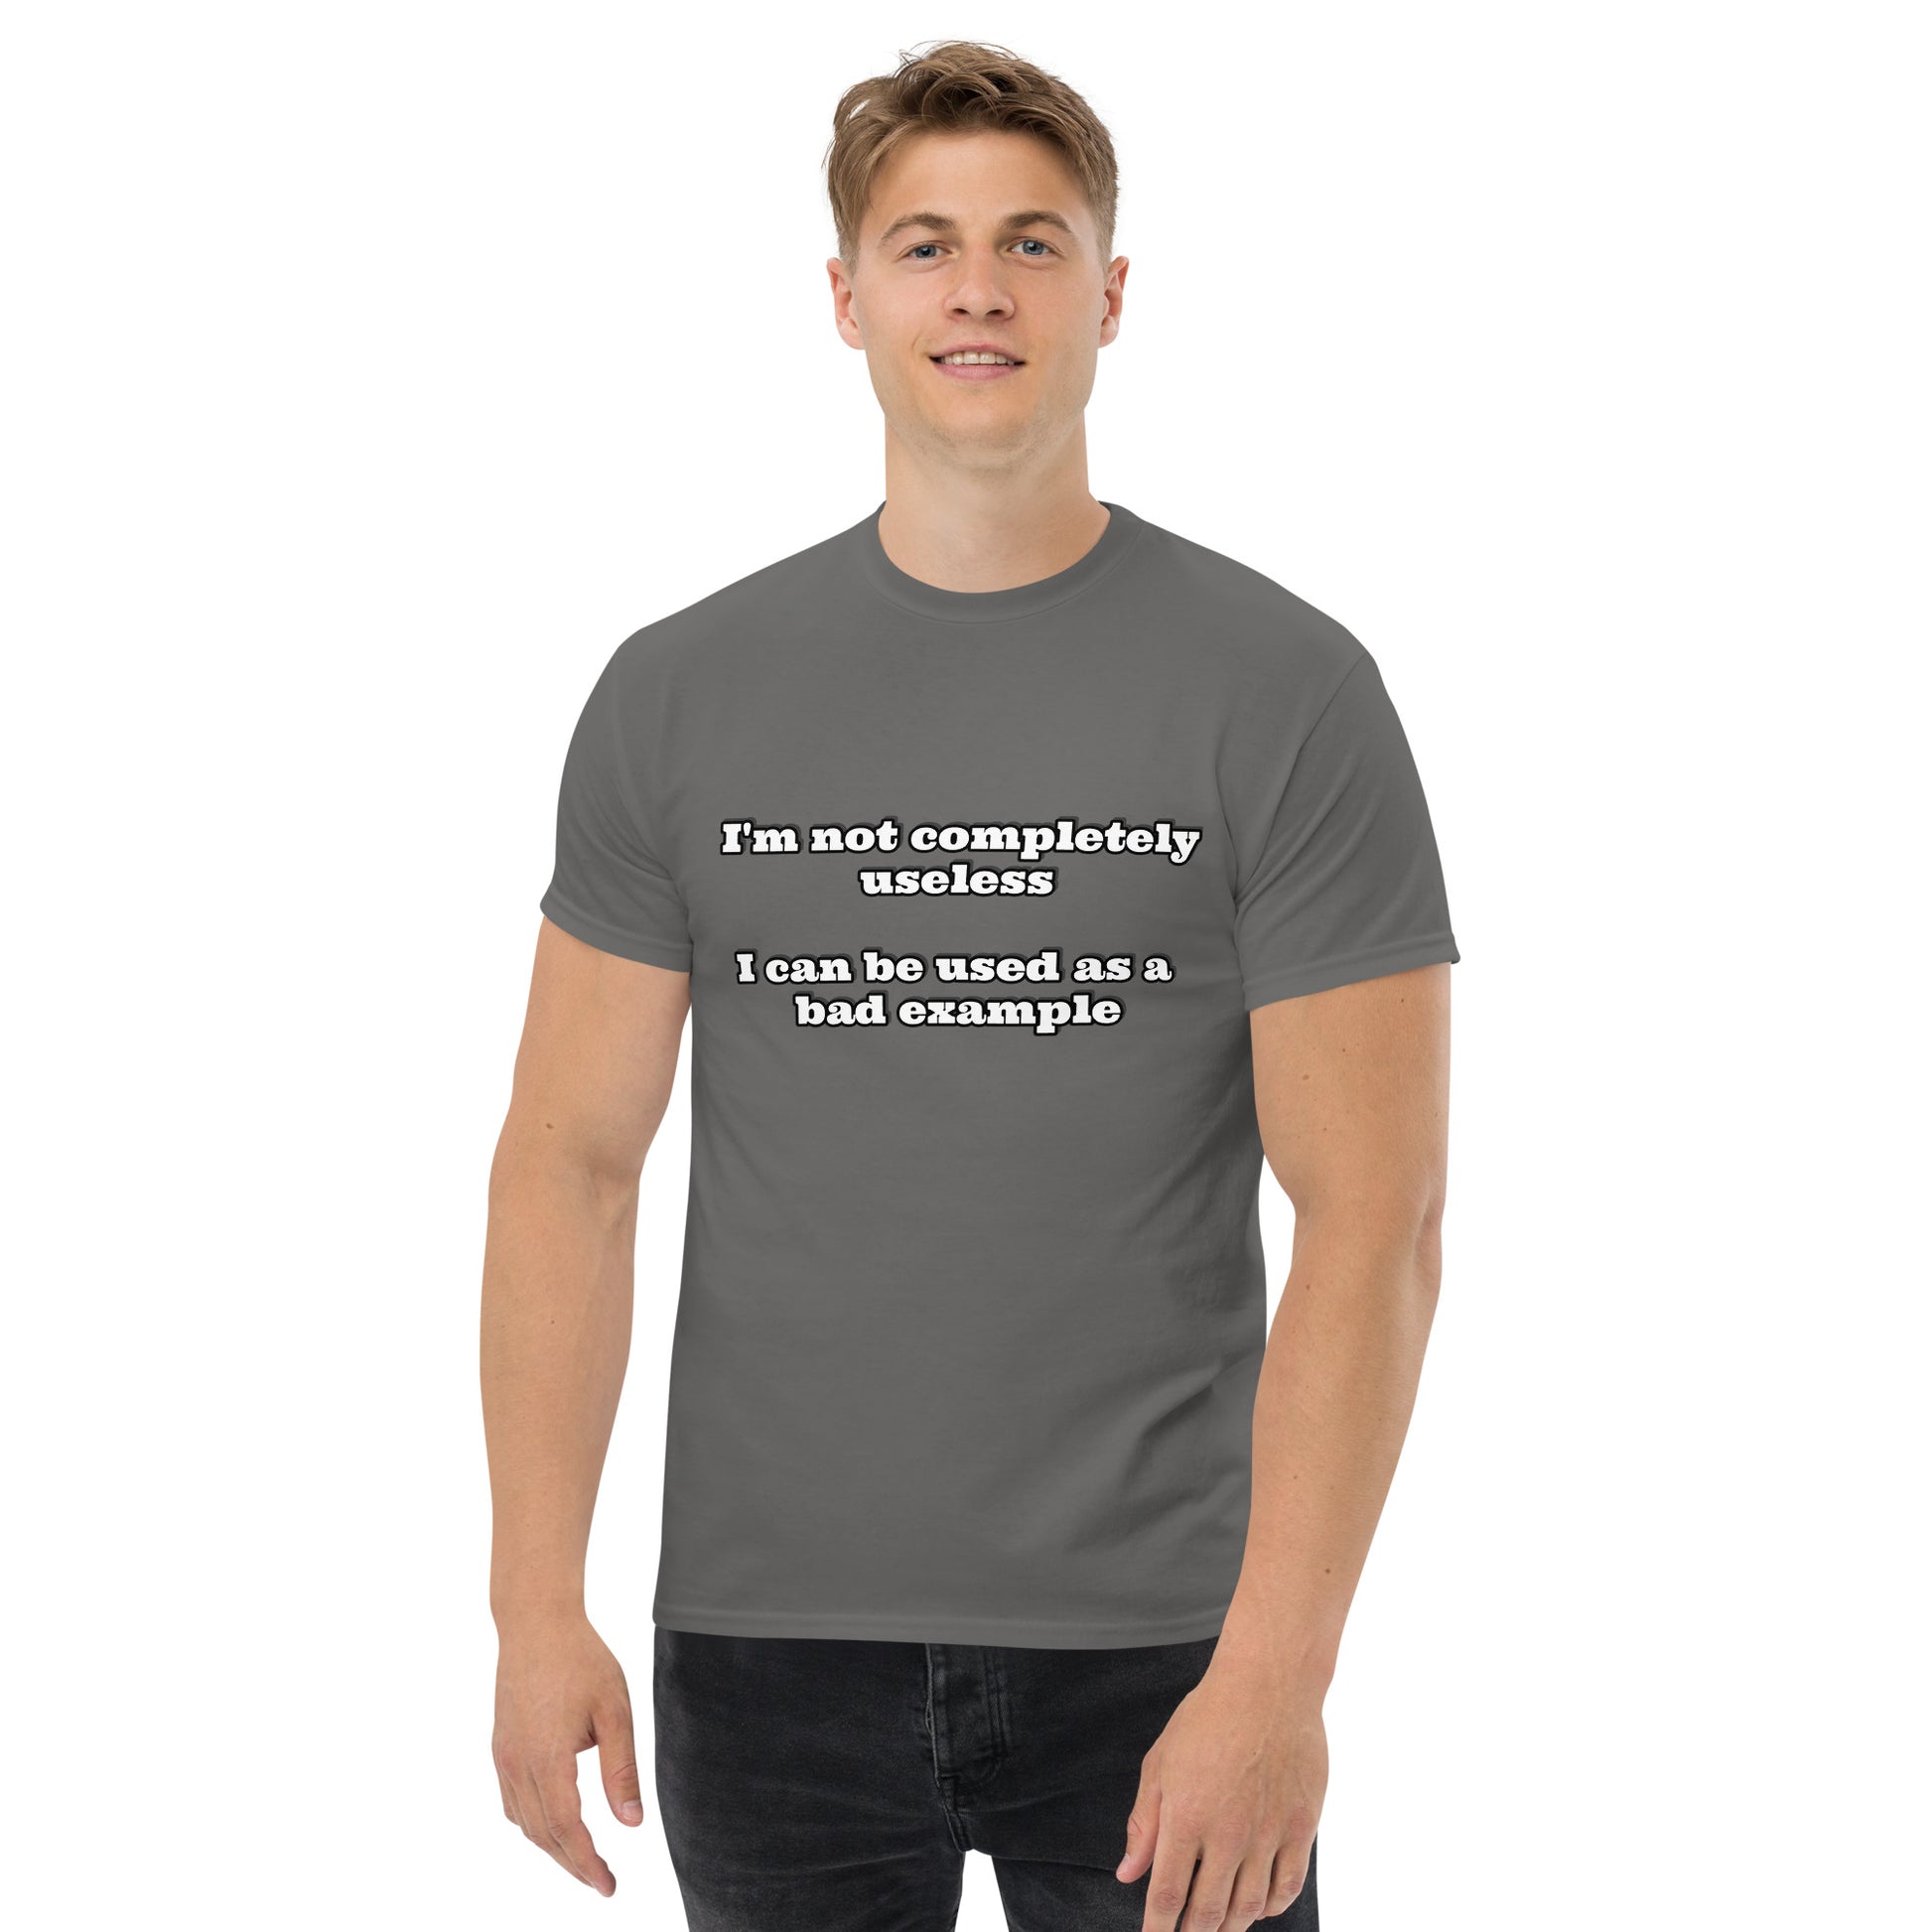 Men with charcoal t-shirt with text “I'm not completely useless I can be used as a bad example”